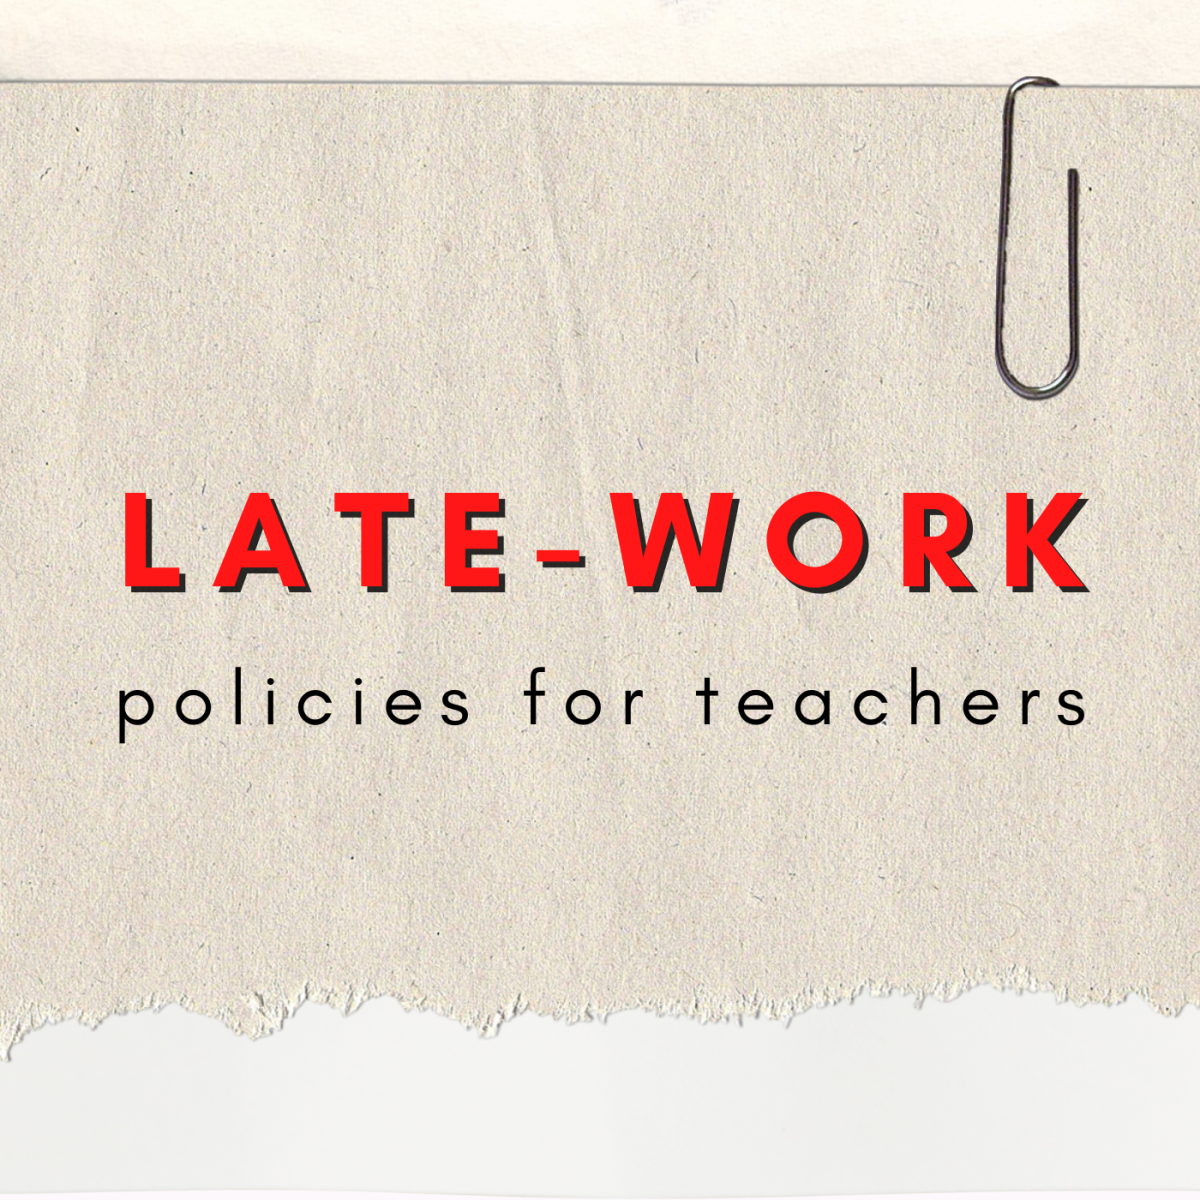 Example Late Work Policies for Teachers